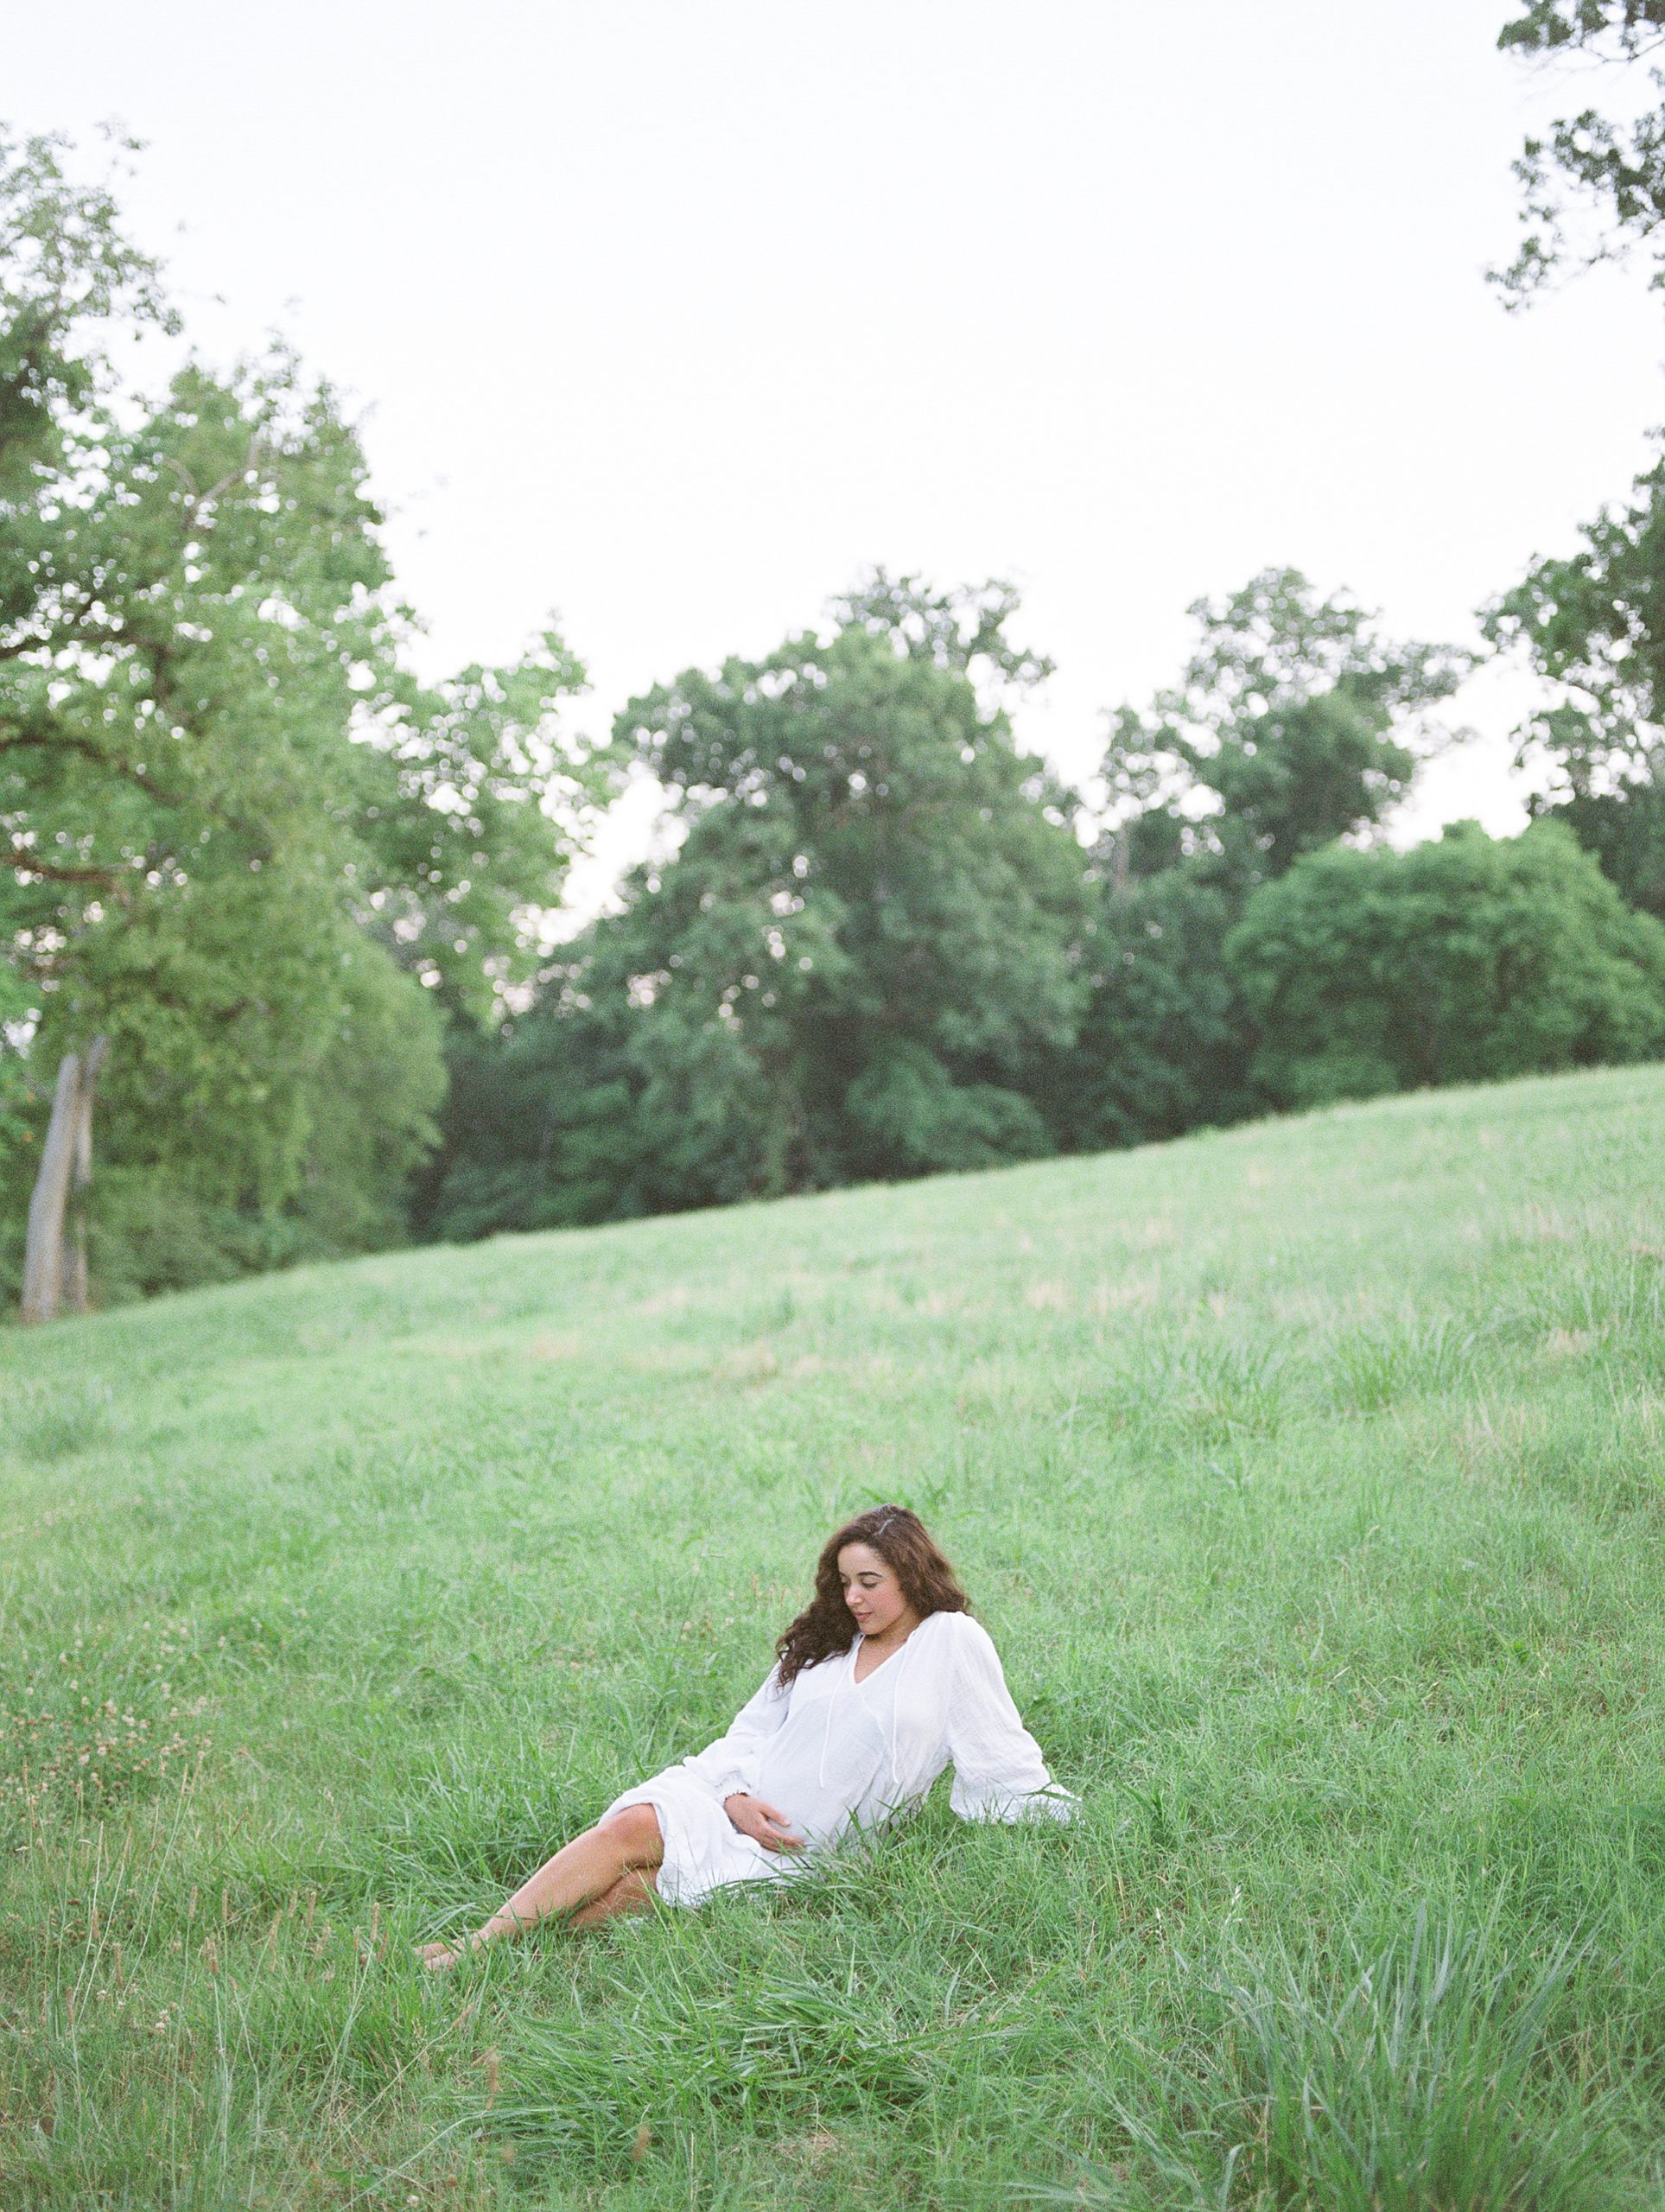 Woman lays on grassy hillside for Maternity Session in Nashville TN